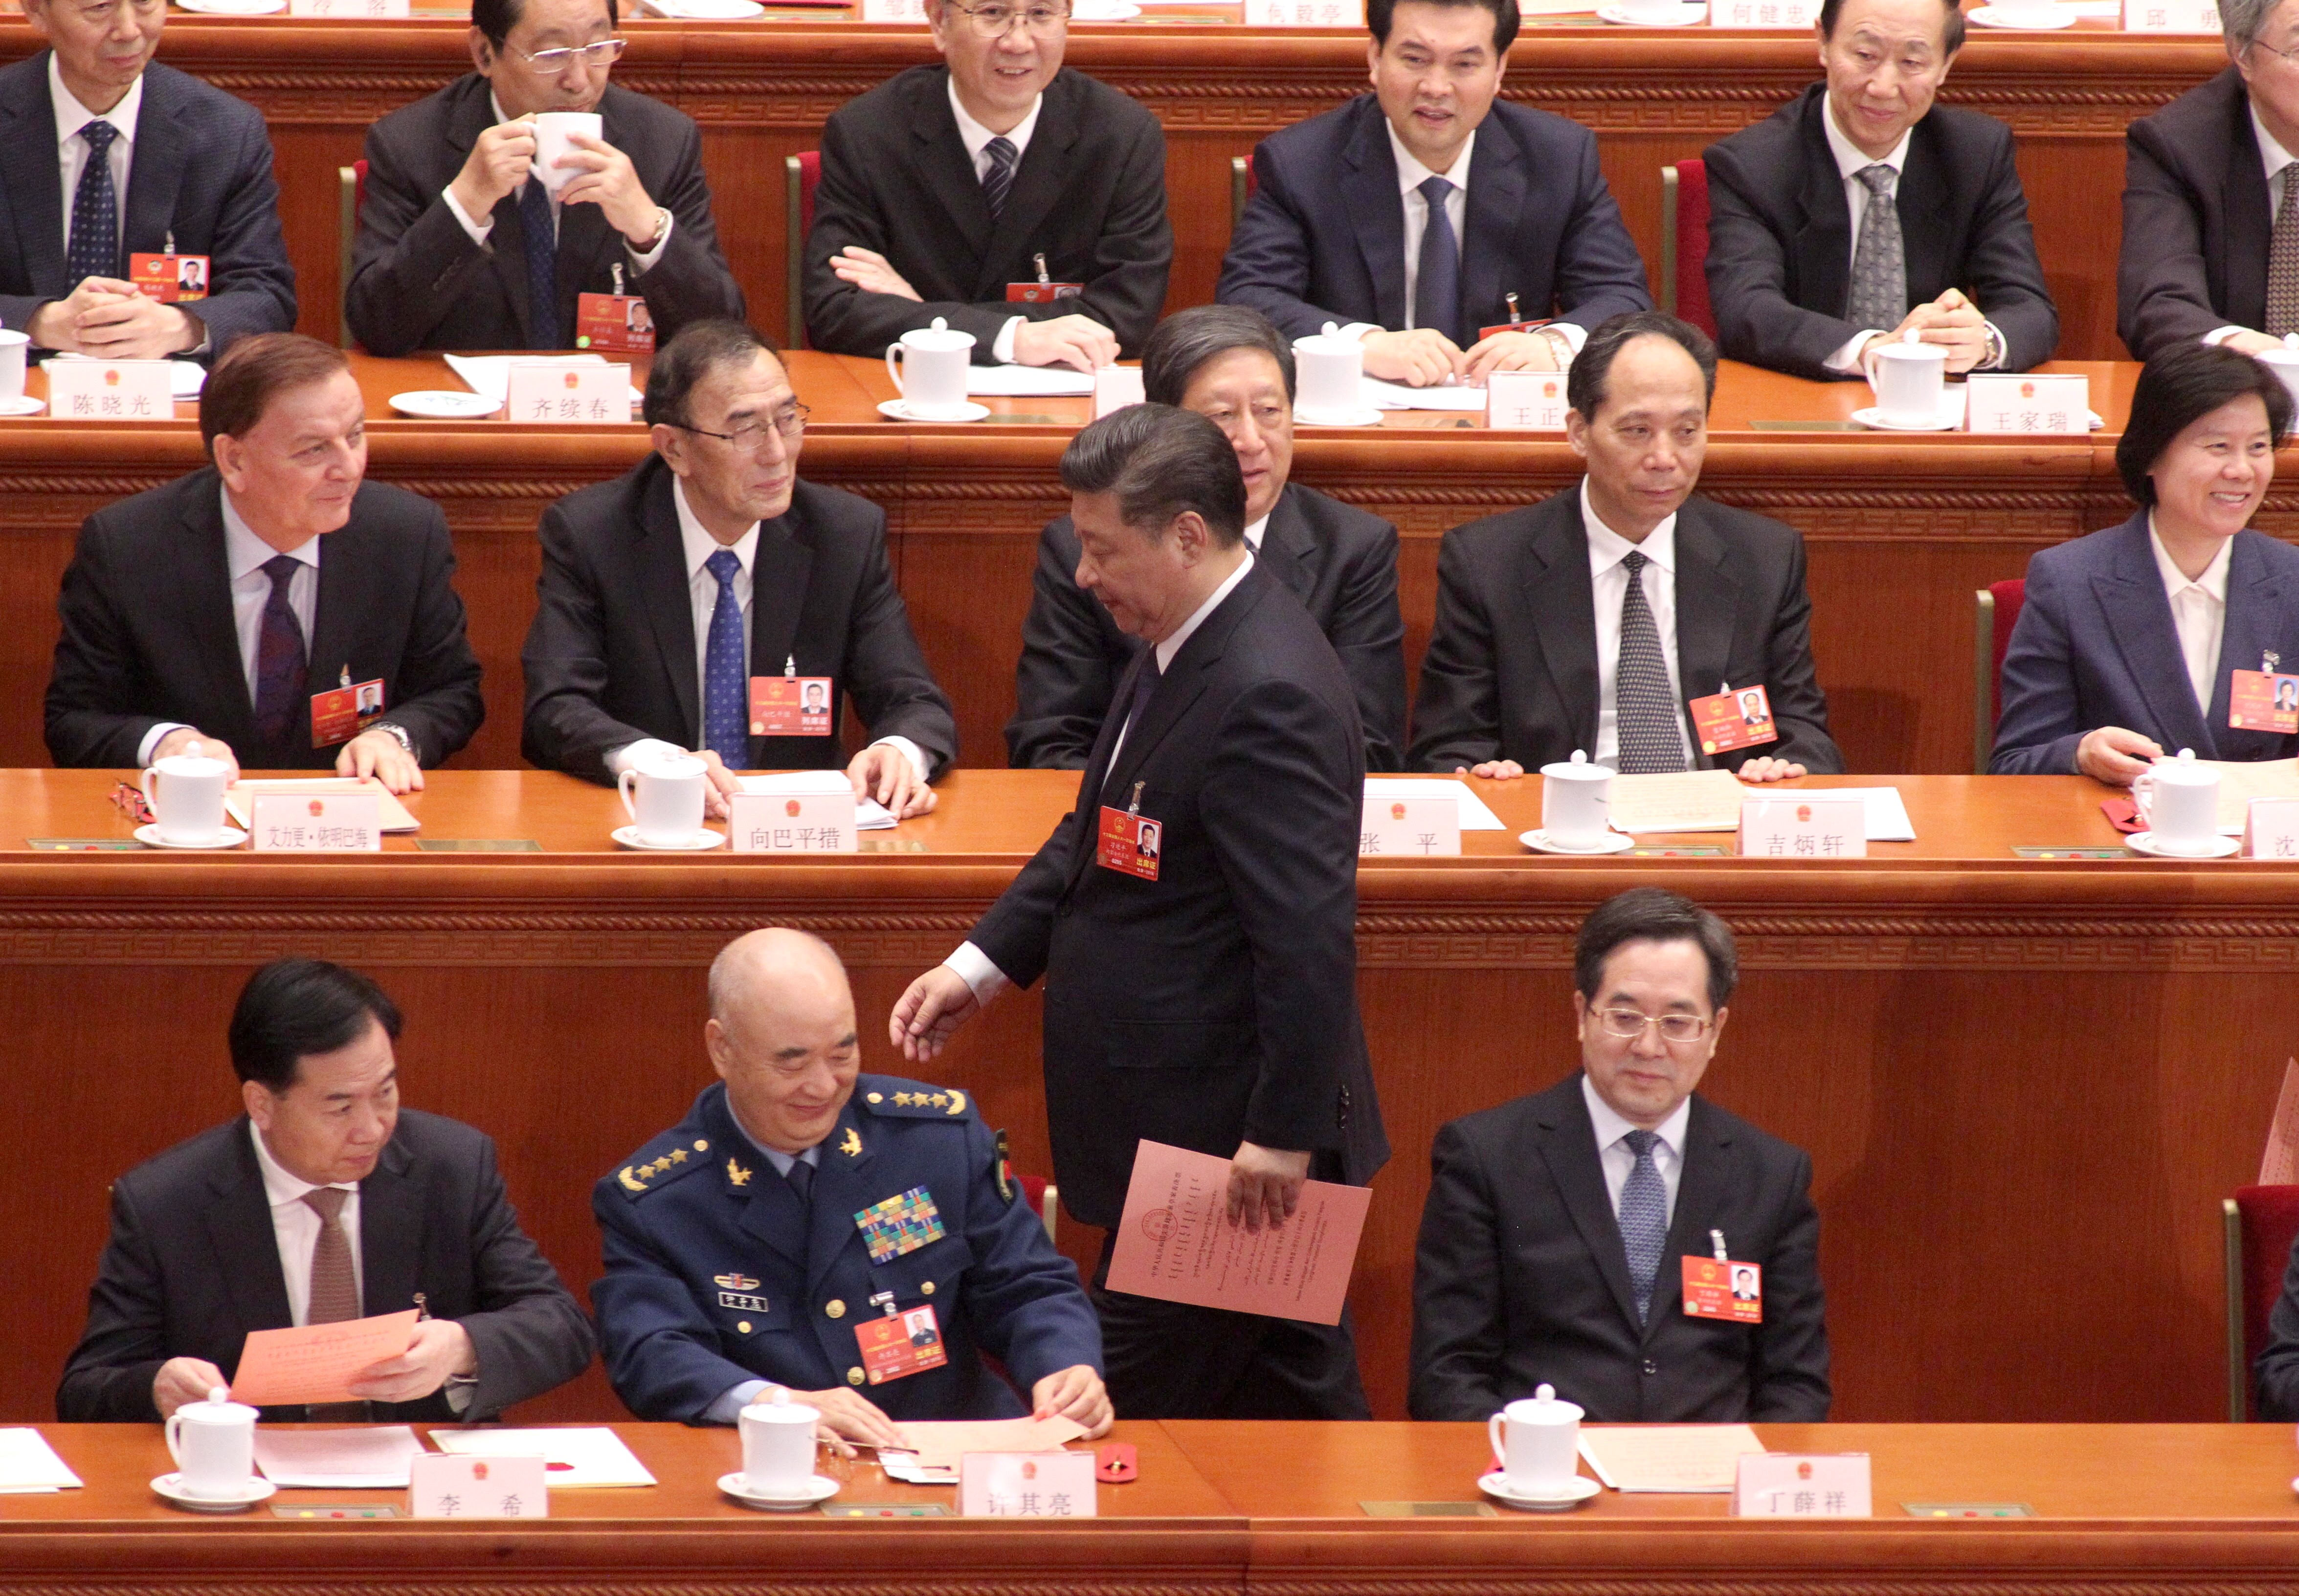 China’s National People’s Congress delegates voted overwhelmingly in favour of a change to the country’s constitution that enables Xi Jinping (standing) to remain president beyond 2023. Photo: Simon Song